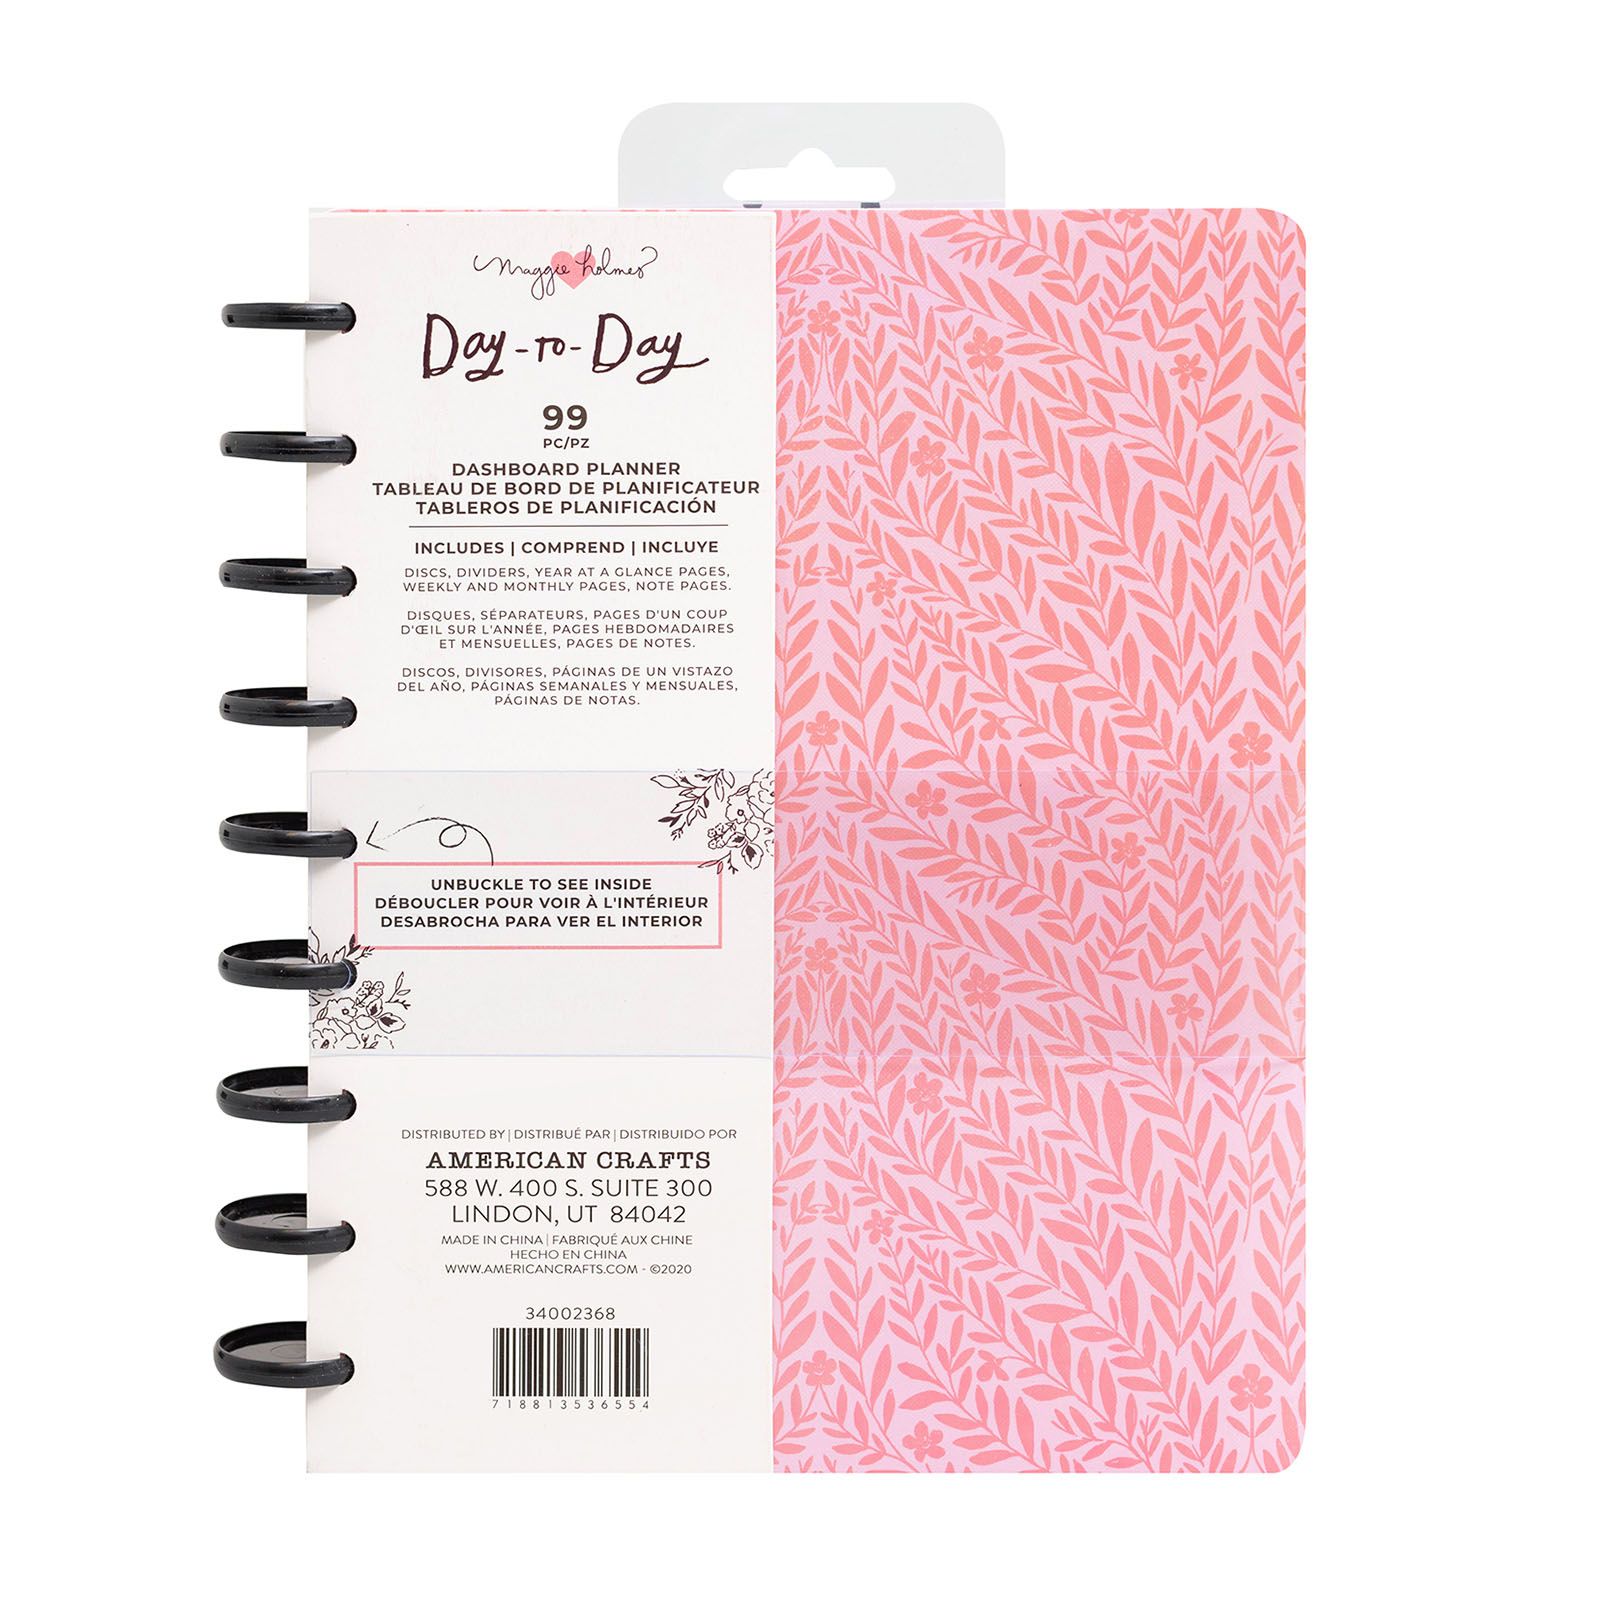 Crate Paper • Day-to-Day dashboard planner Pink vines